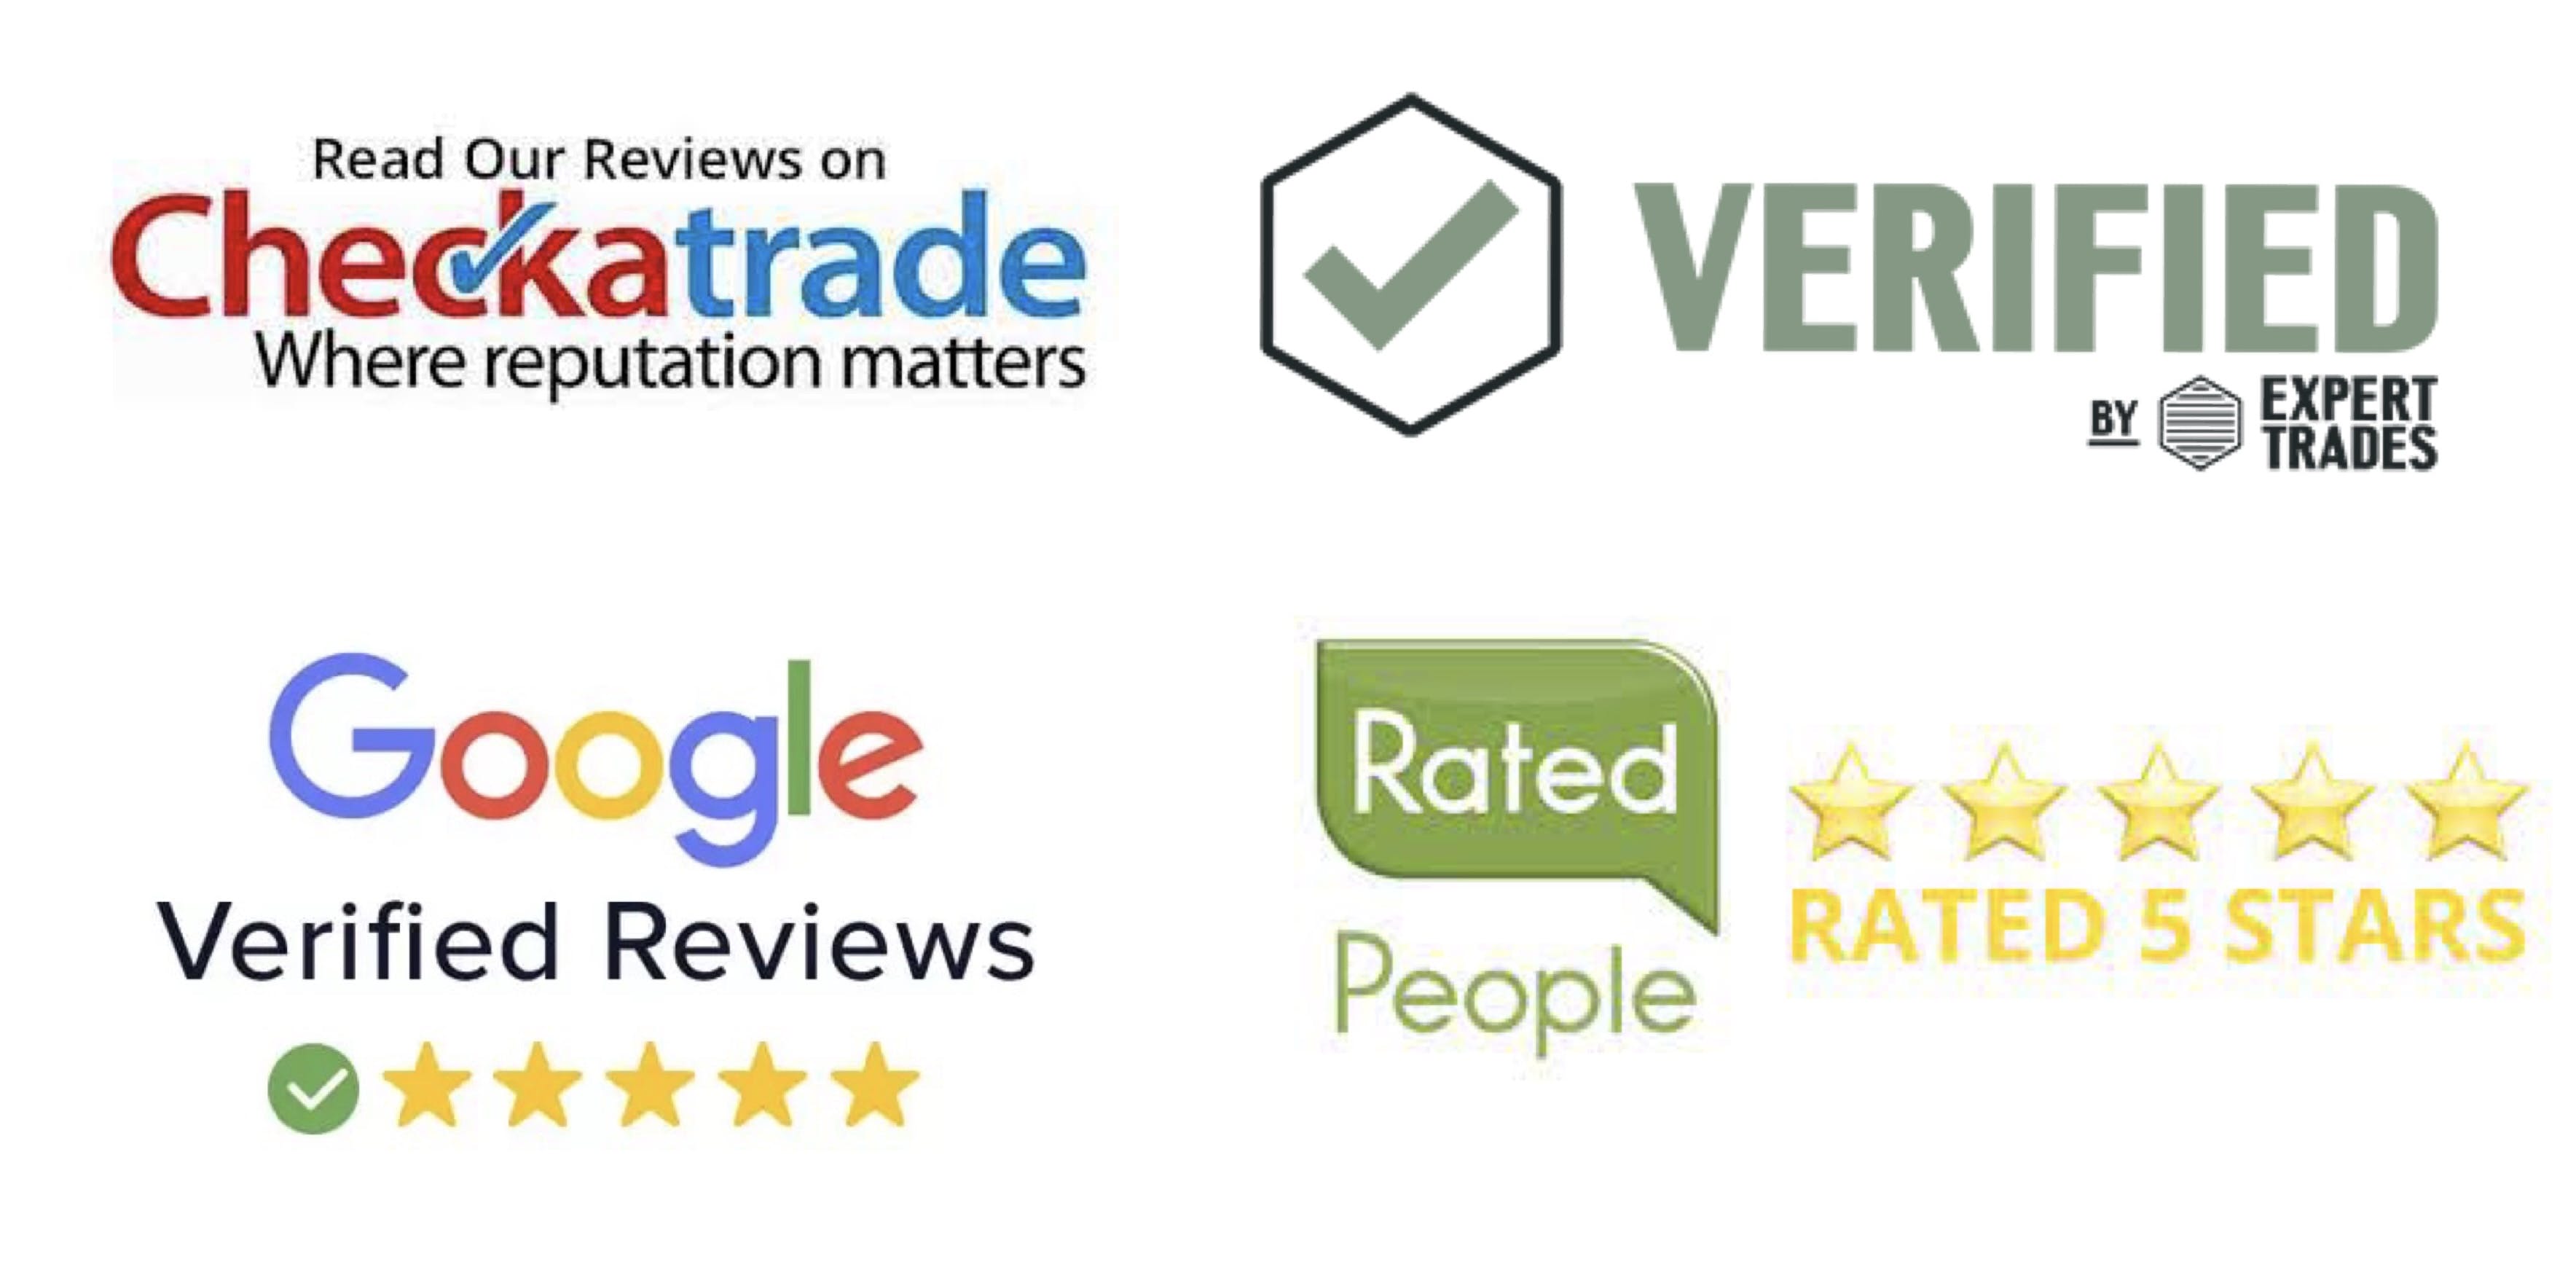 Why our reviews are important to you